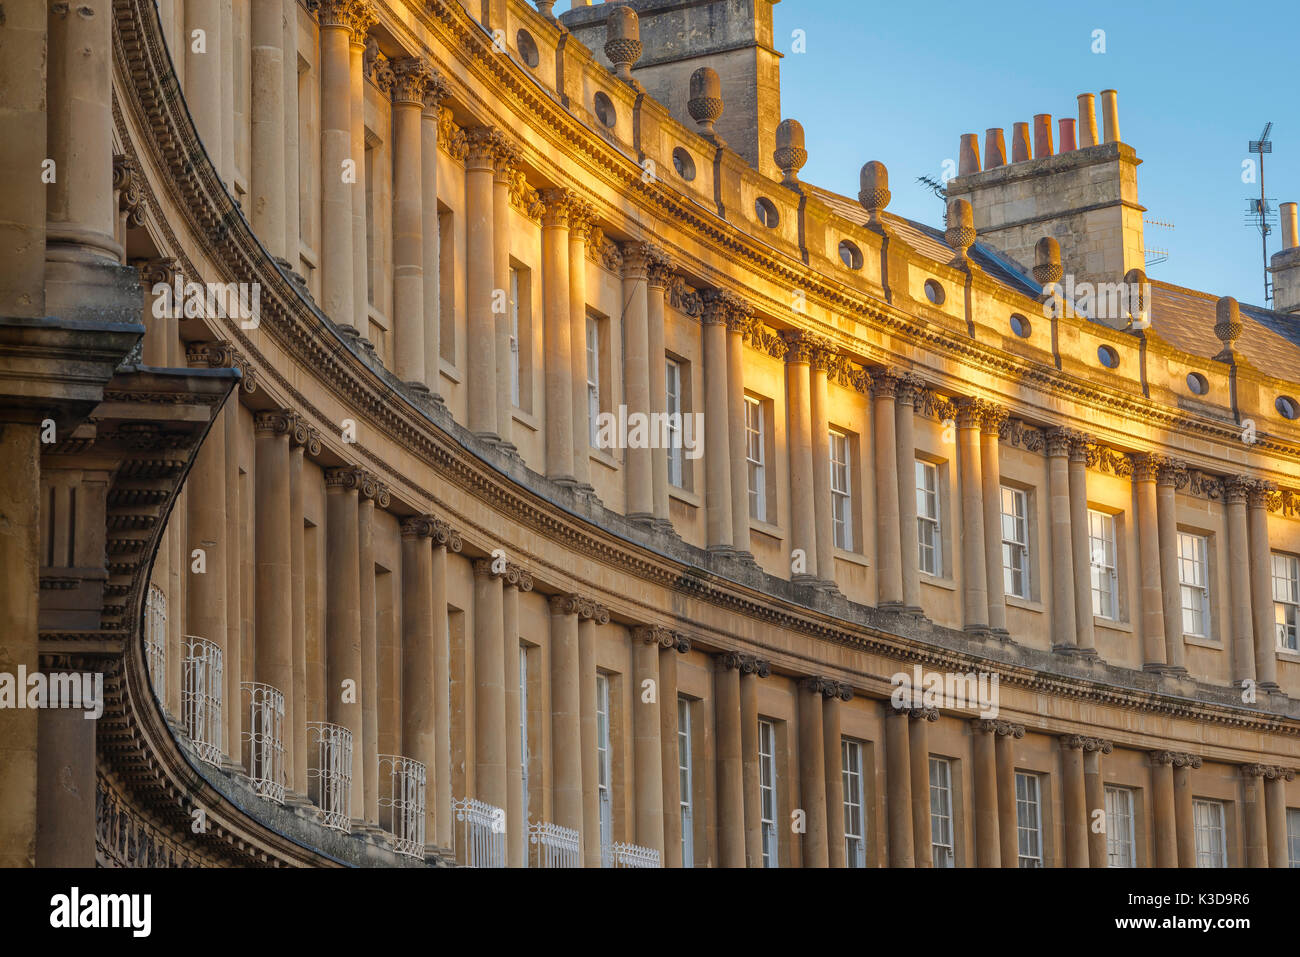 Bath England, detail of The Circus, a set of three curved Georgian terraced buildings that form a complete circlular space in the city of Bath UK. Stock Photo